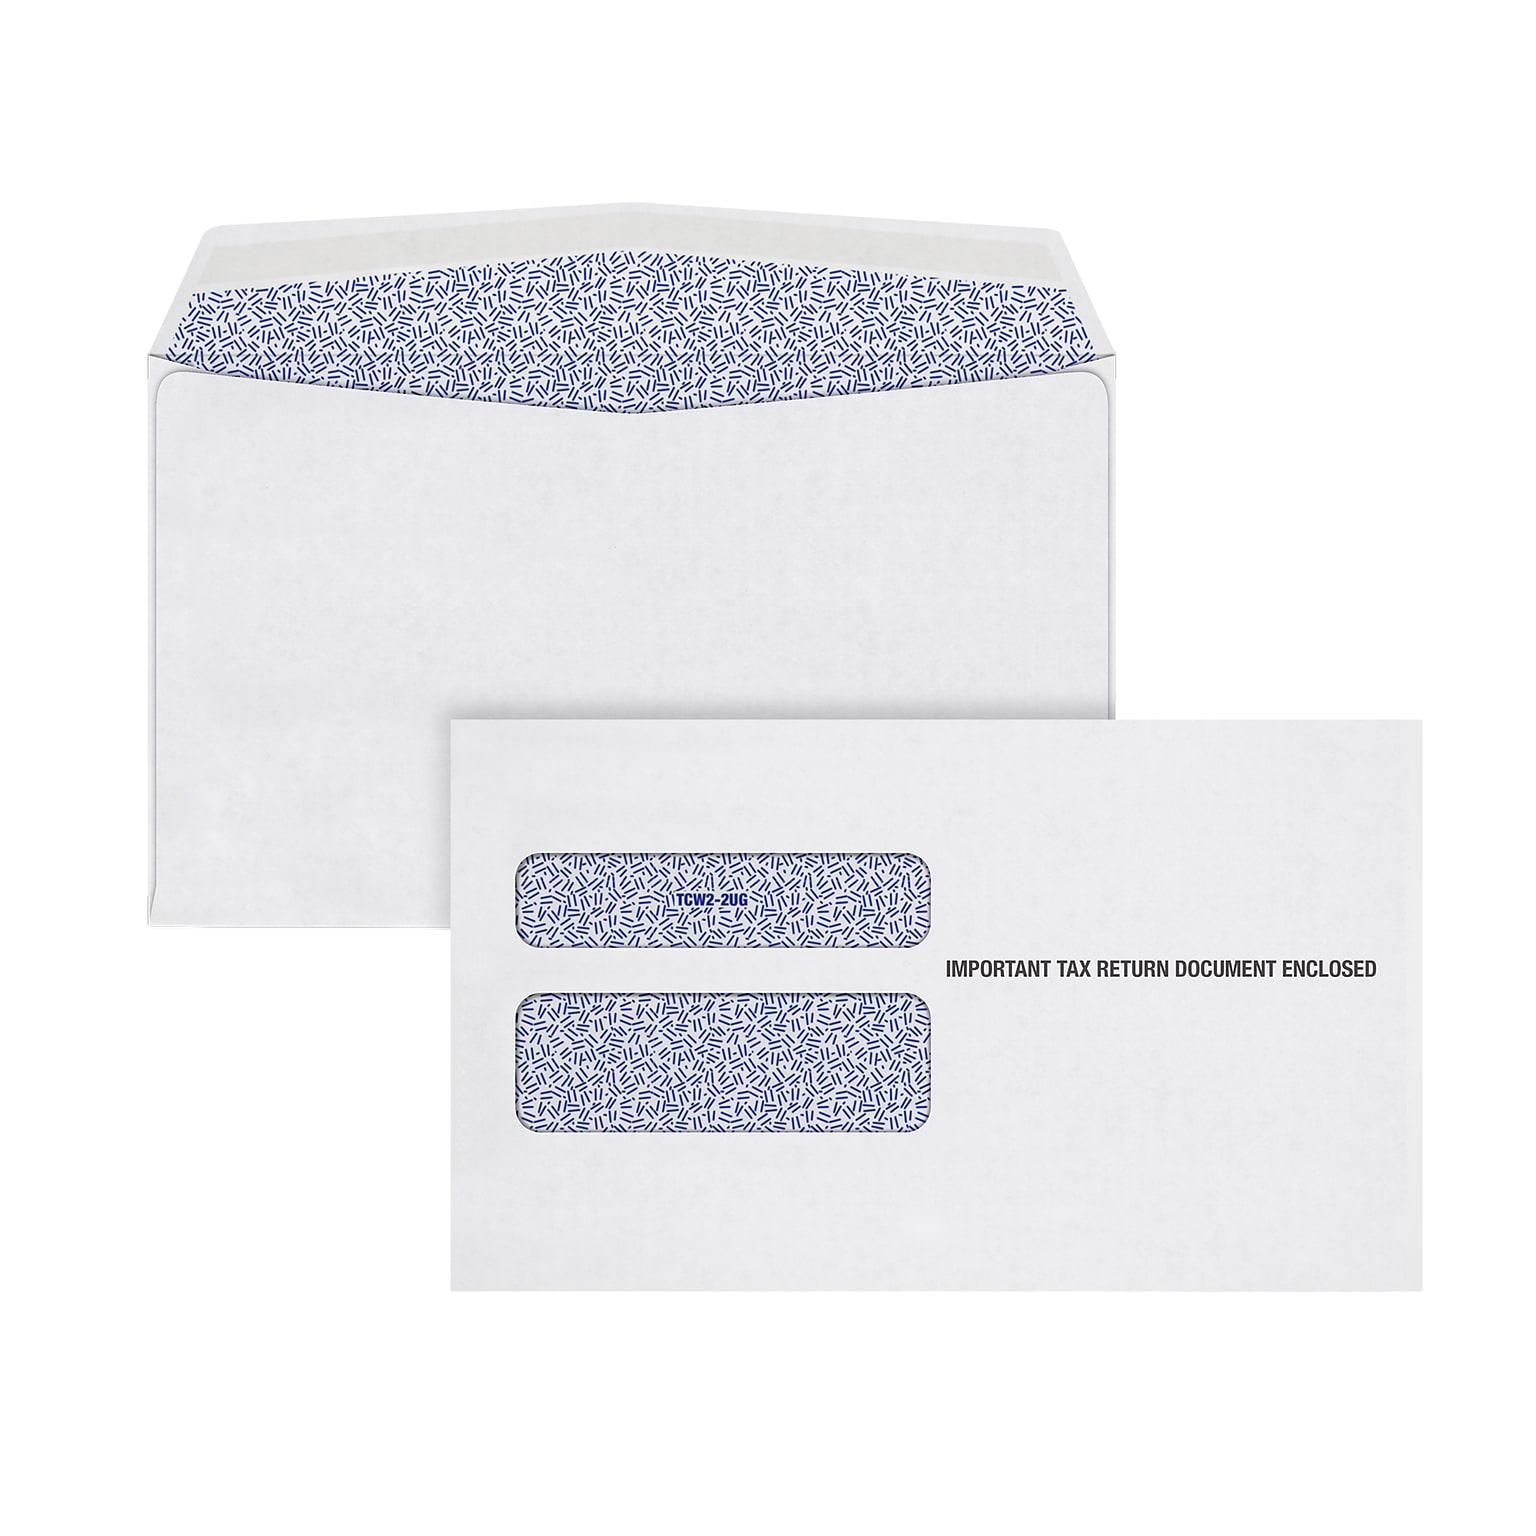 TOPS 2023 Double Window Continuous Tax Form Envelopes, White, 100/Pack (7990E-S)